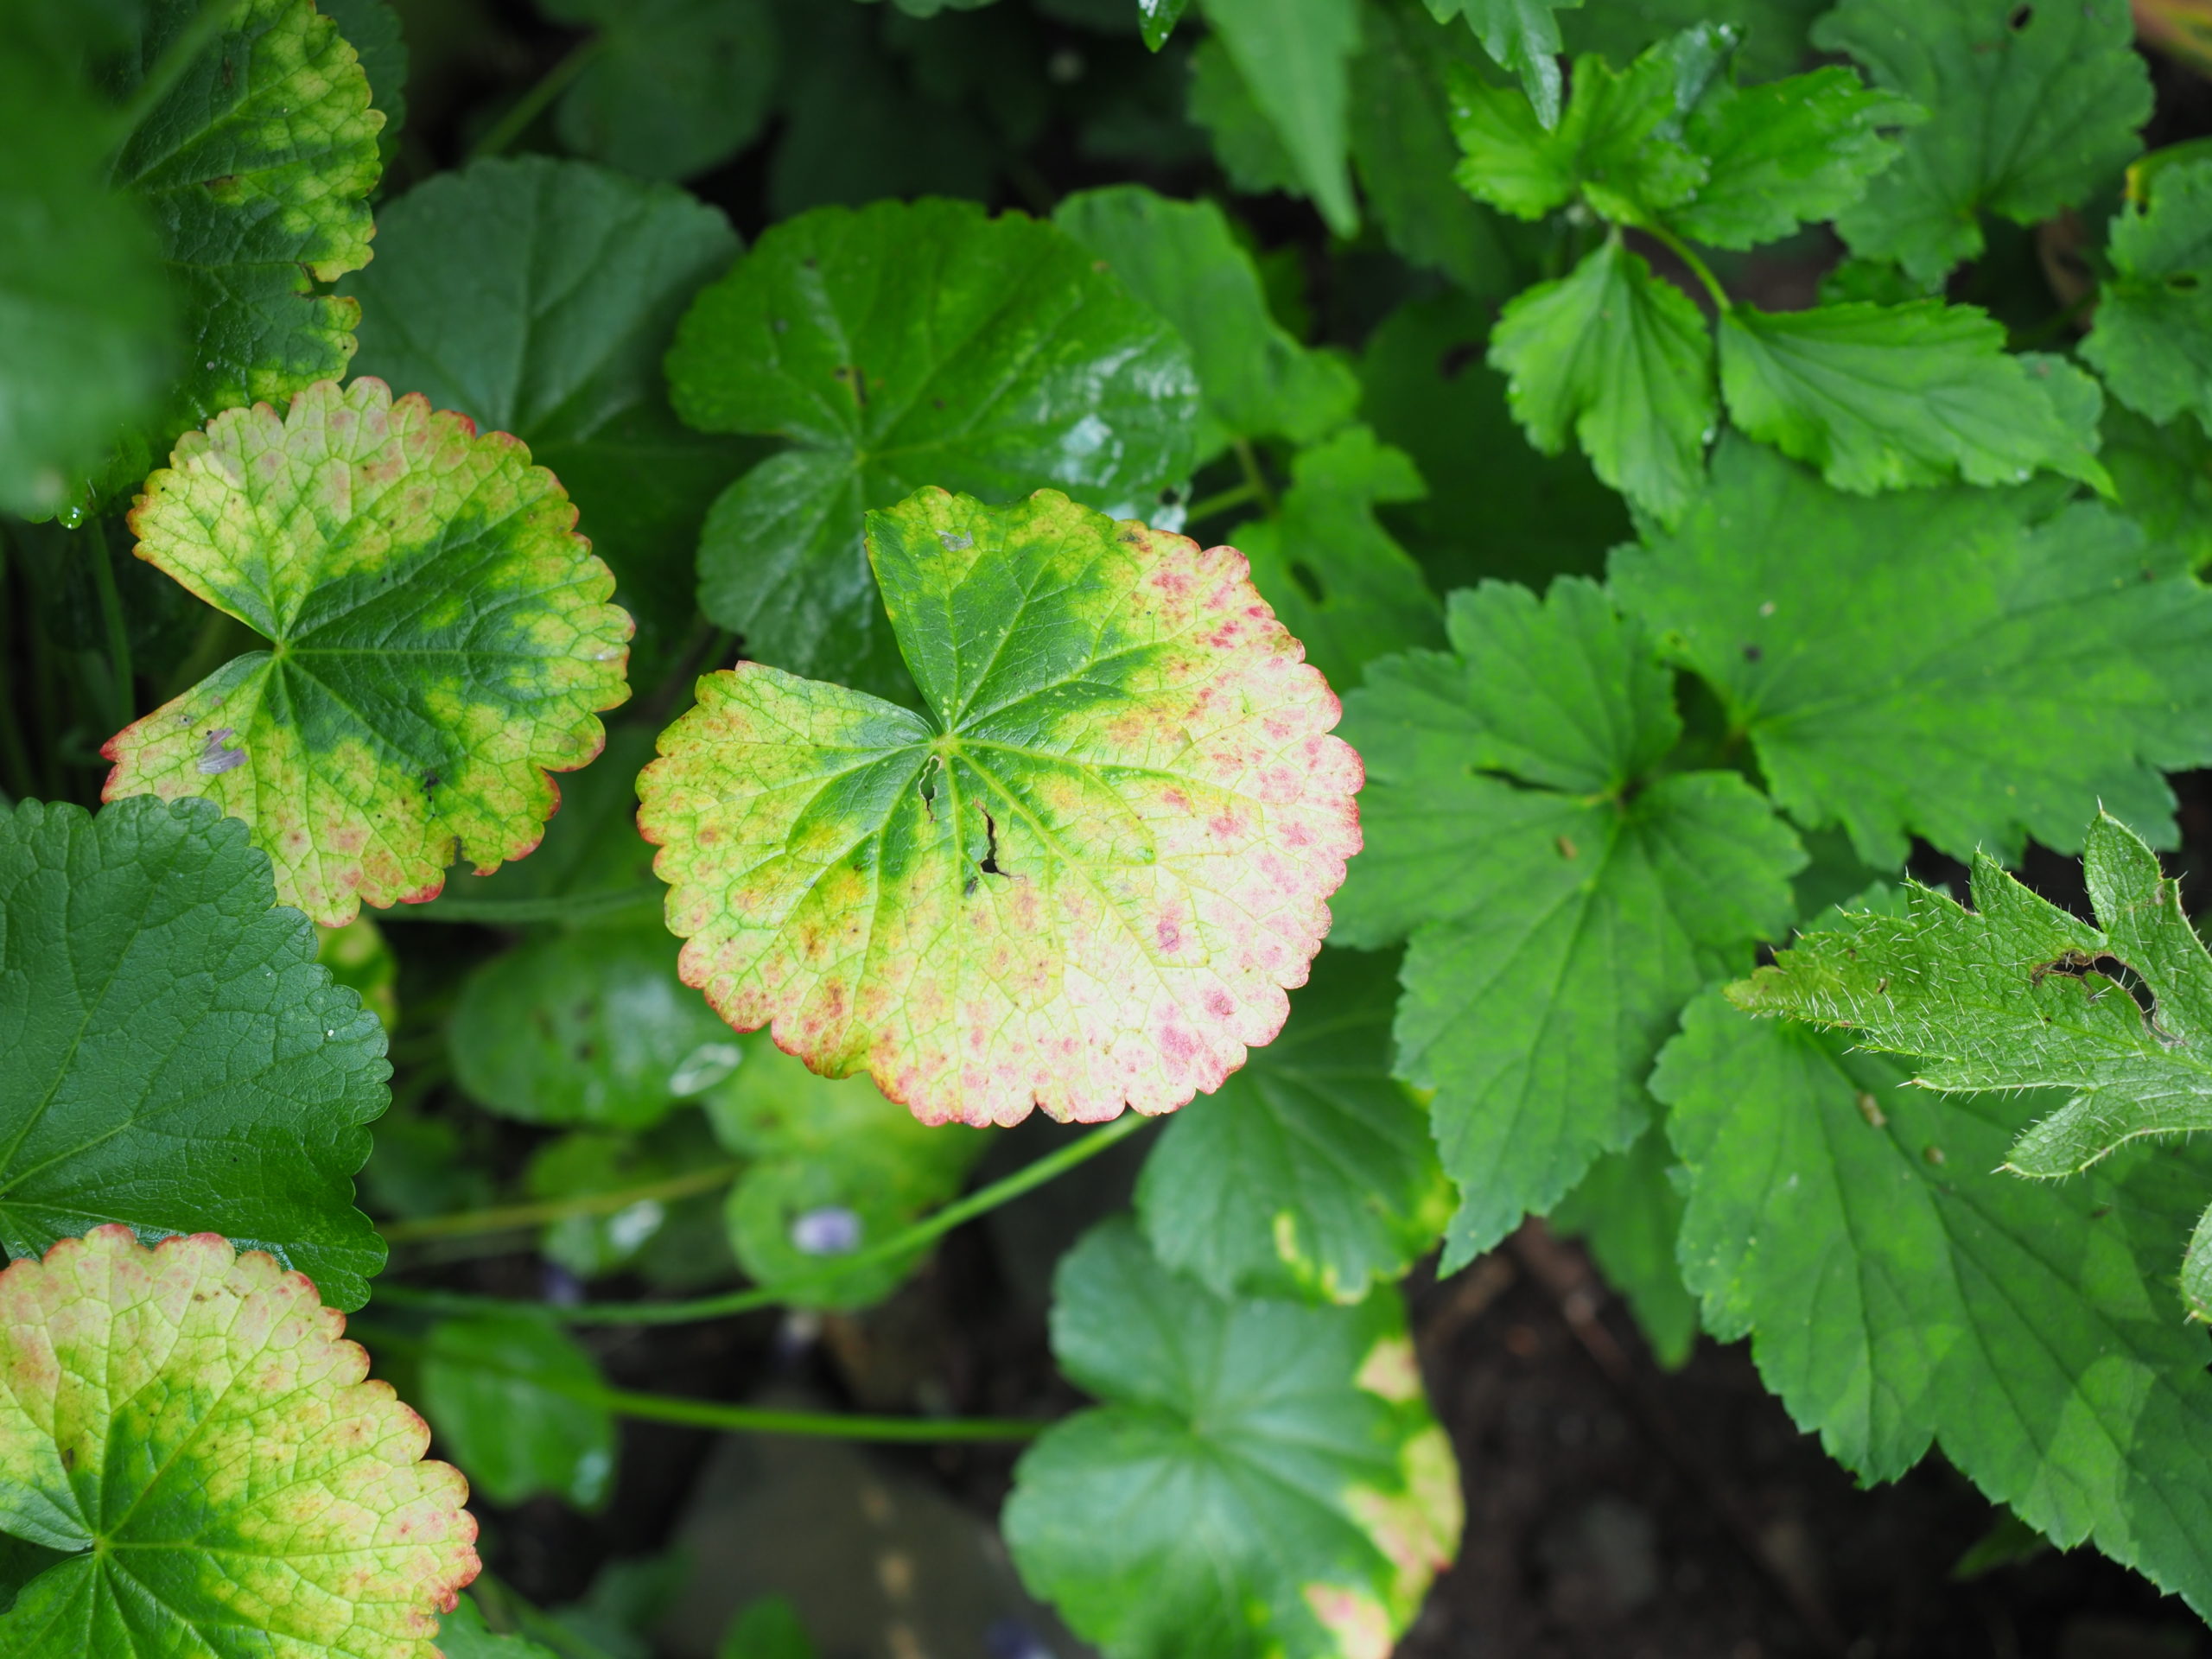 Sidalcia foliage showing signs of nutrient deficiency. A disease would probably have resulted in browning and yellowing and a virus issue would not be so symmetrical.